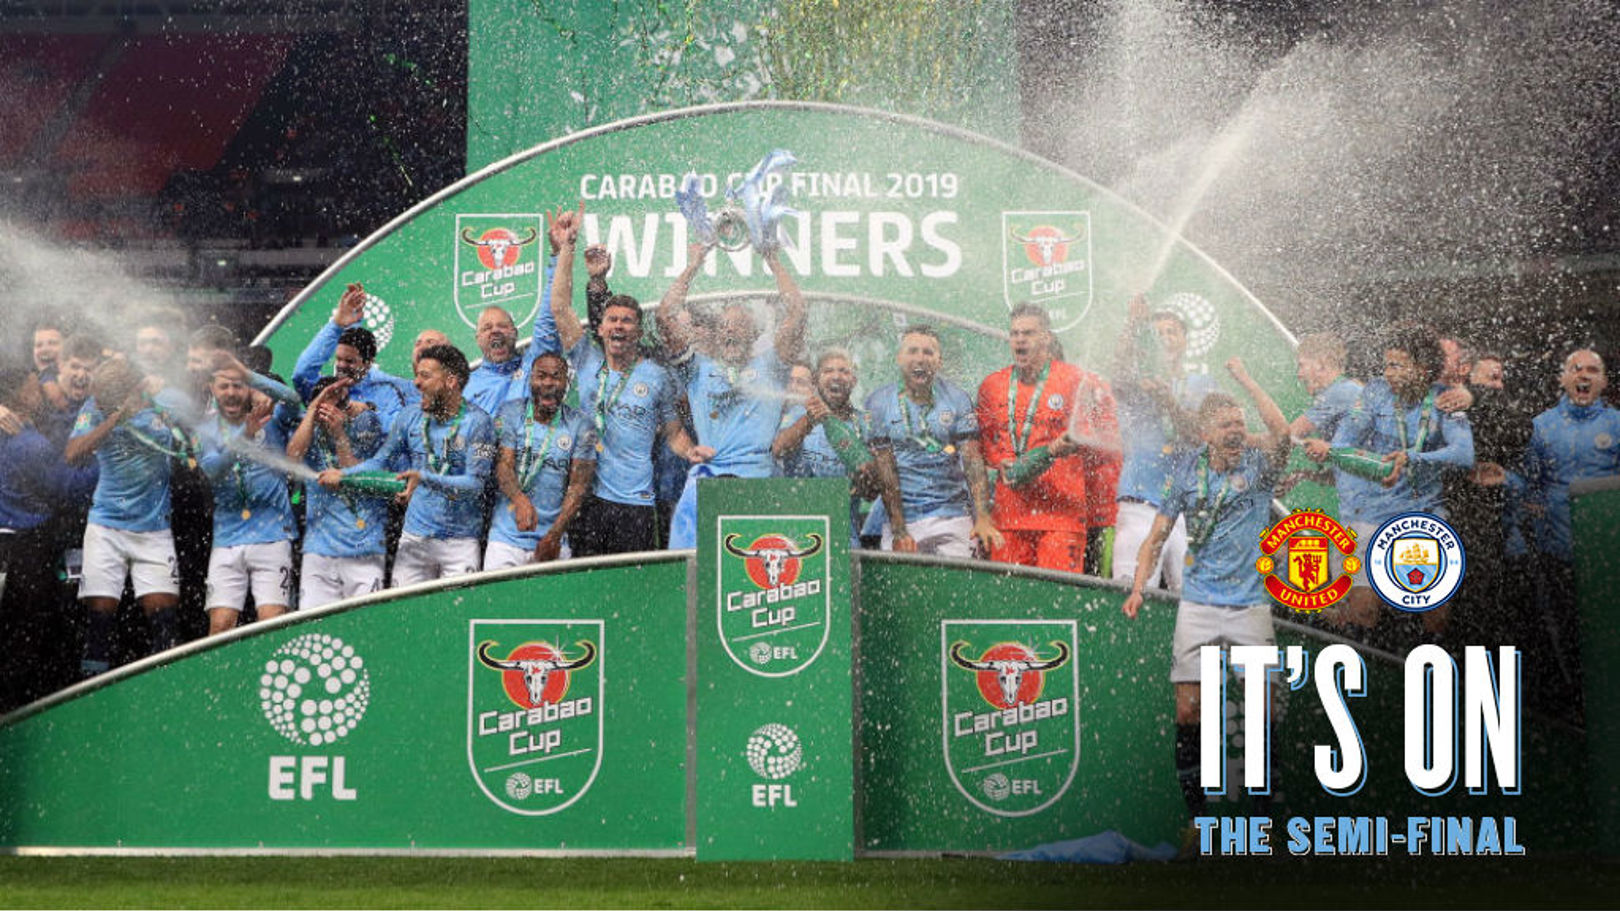 City's formidable Carabao Cup record